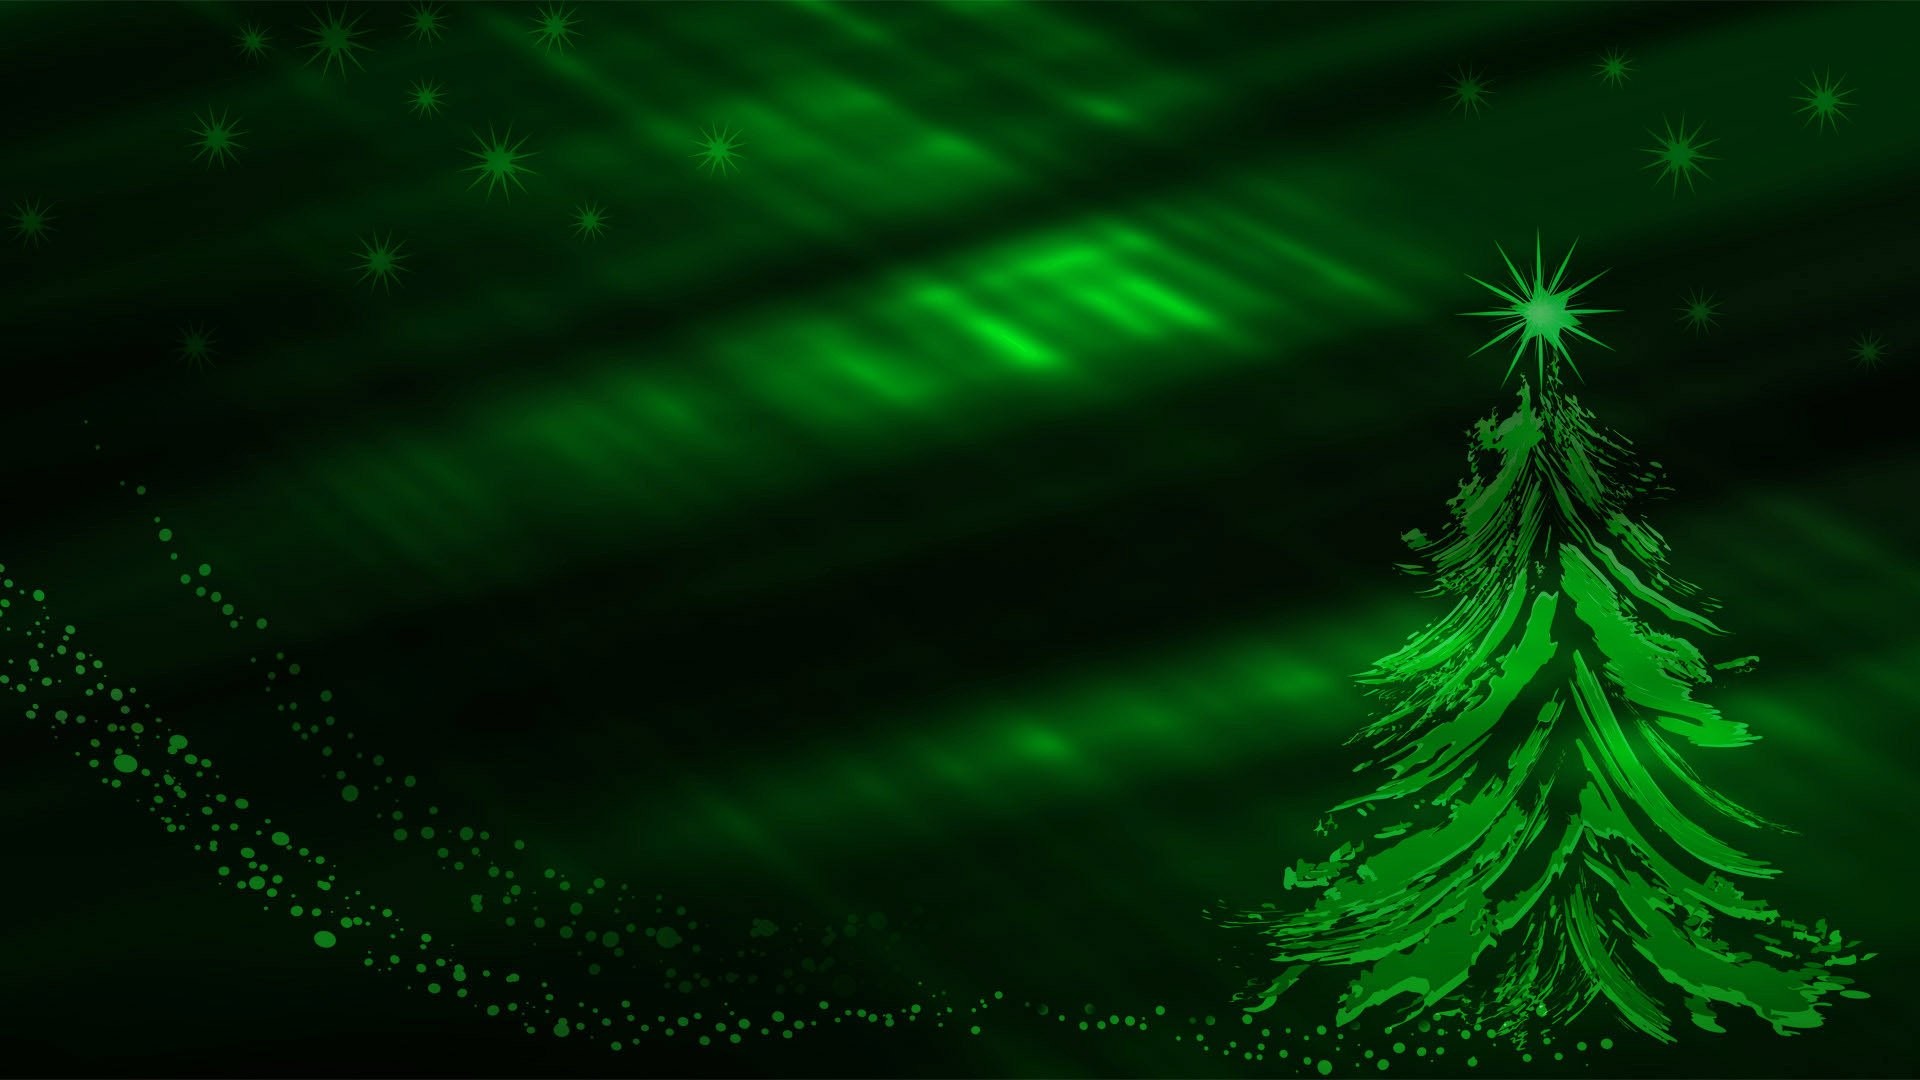 1920x1080 Christian Christmas Backgrounds, Images and Mini Movies – ImageVine